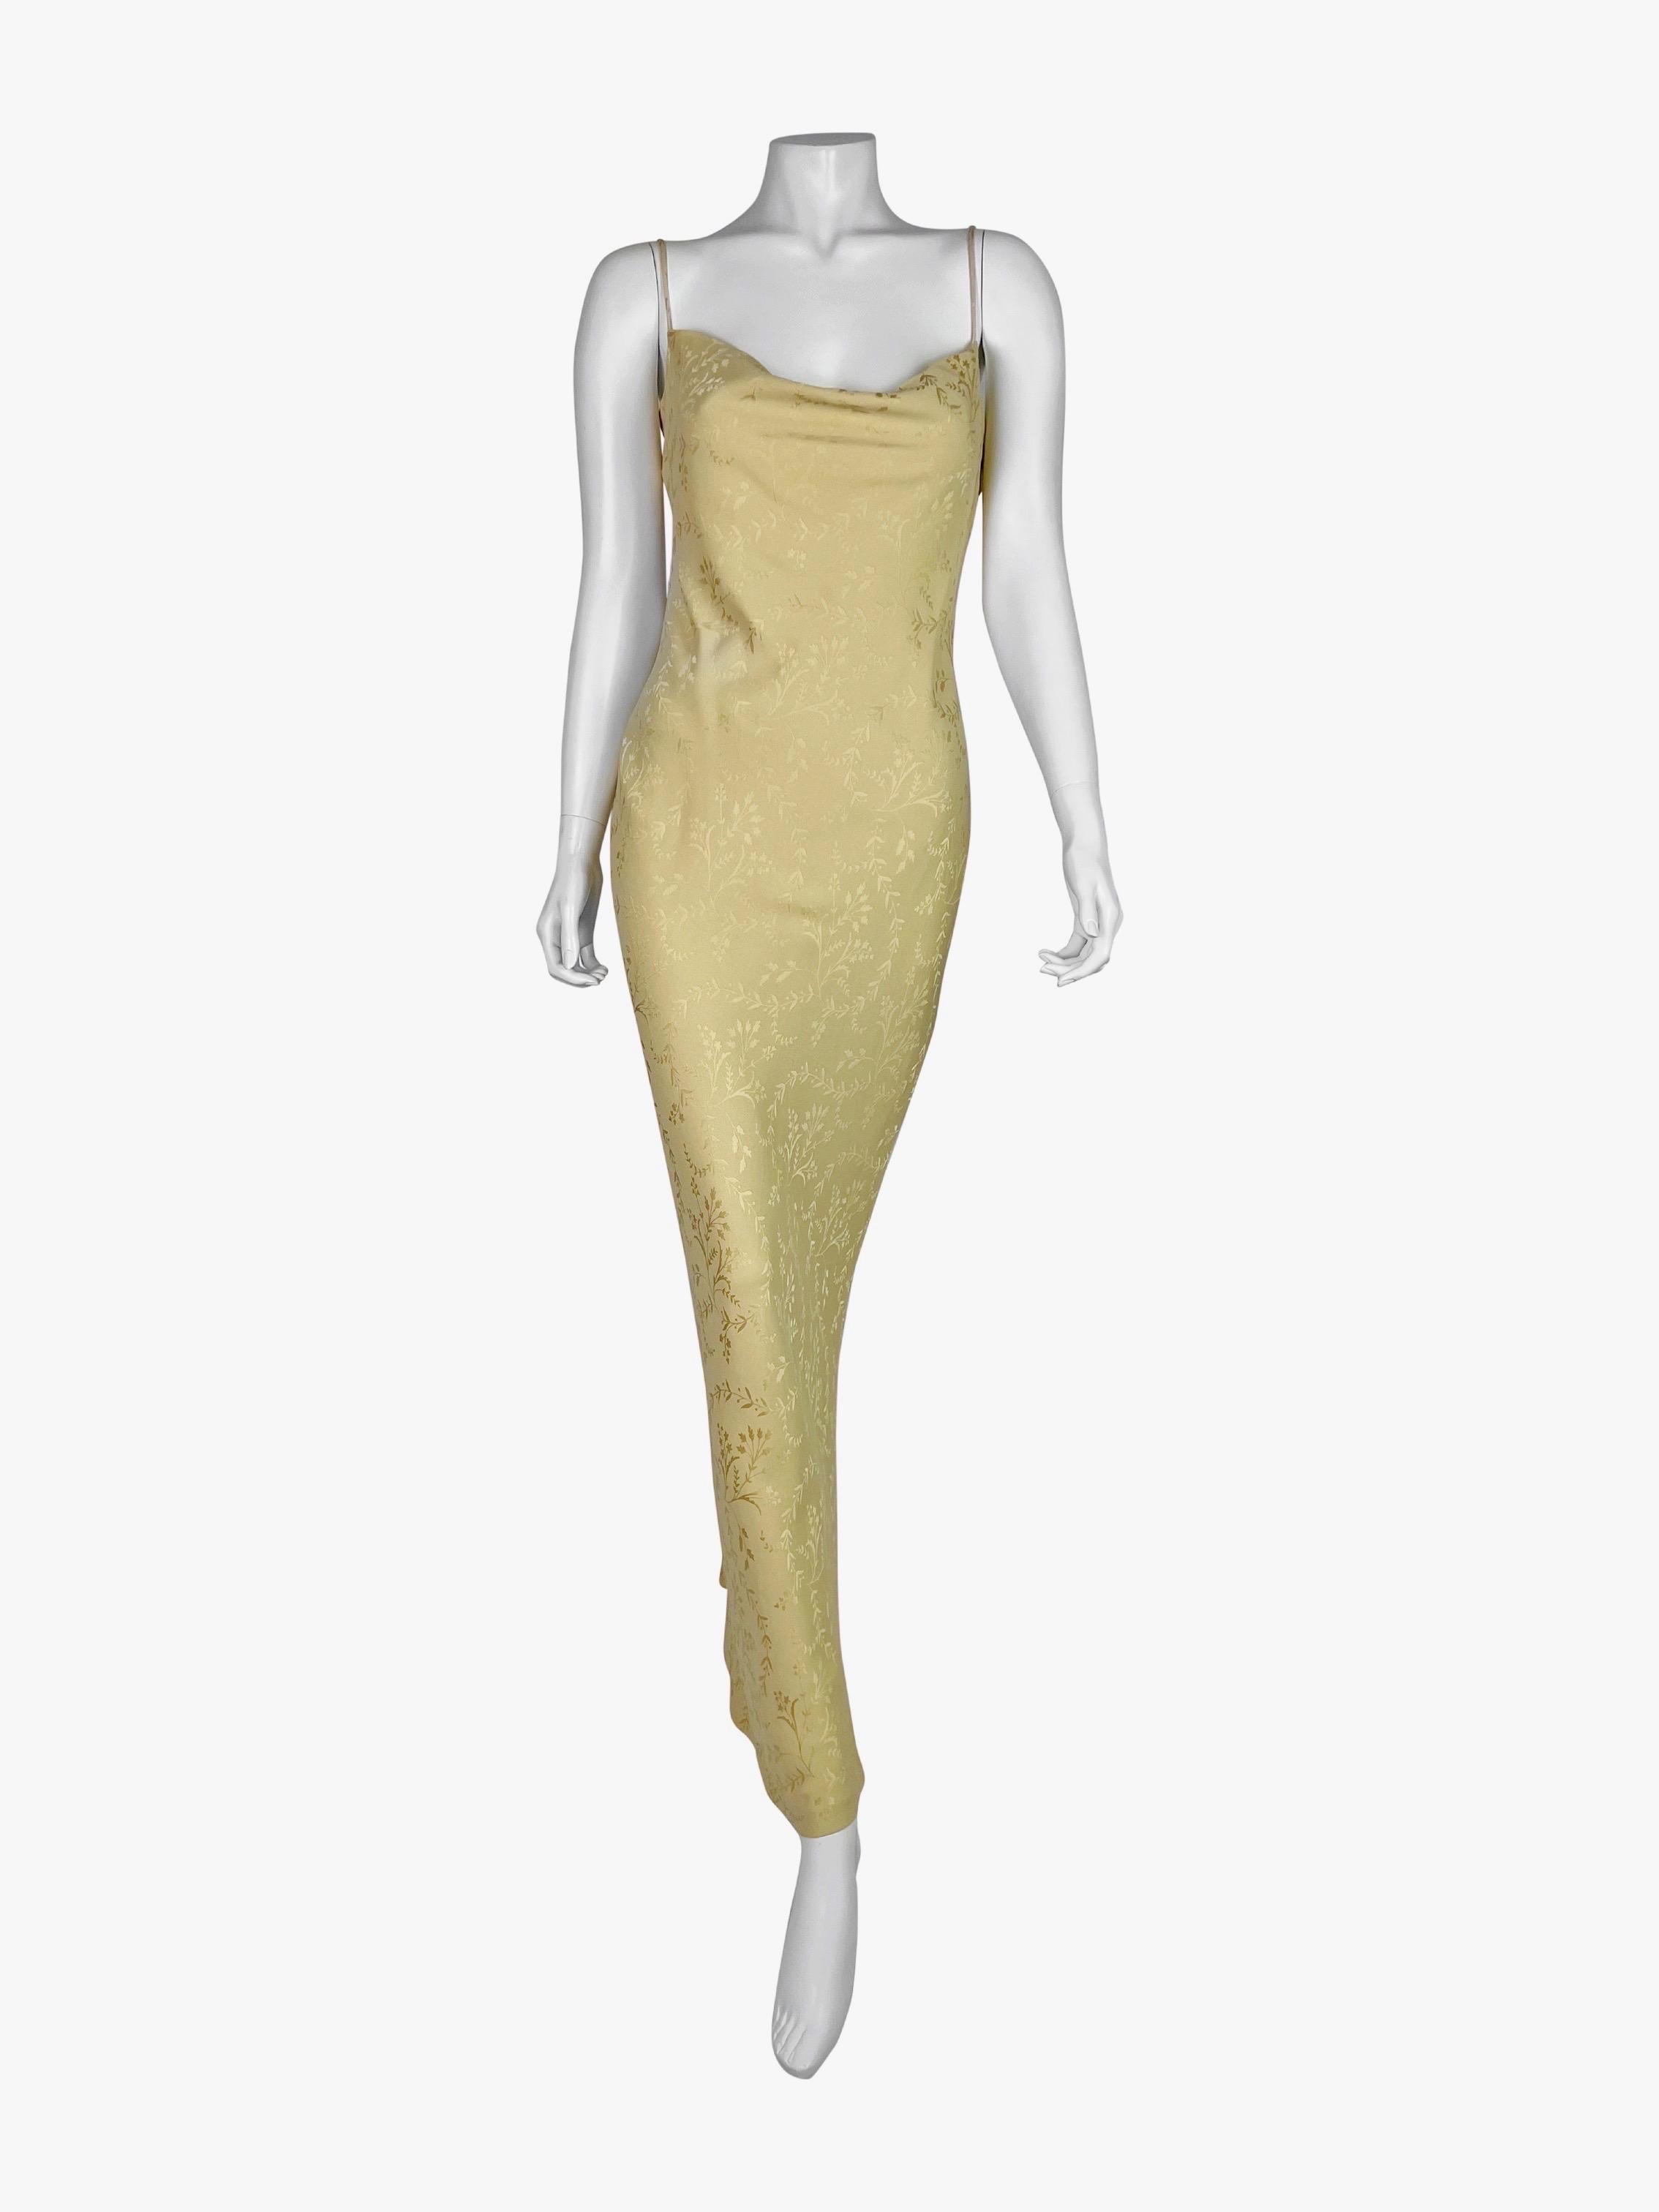 A classic bias-cut dress from the best Galliano years at Dior in a beautiful soft buttercream yellow jacquard.

Size FR 42, US 10.

Measurements (flat lay on one side):

Armpit to armpit - 48 cm (19 in)
Waist - 44 cm (17,5 in)
Hips - 53 cm (21